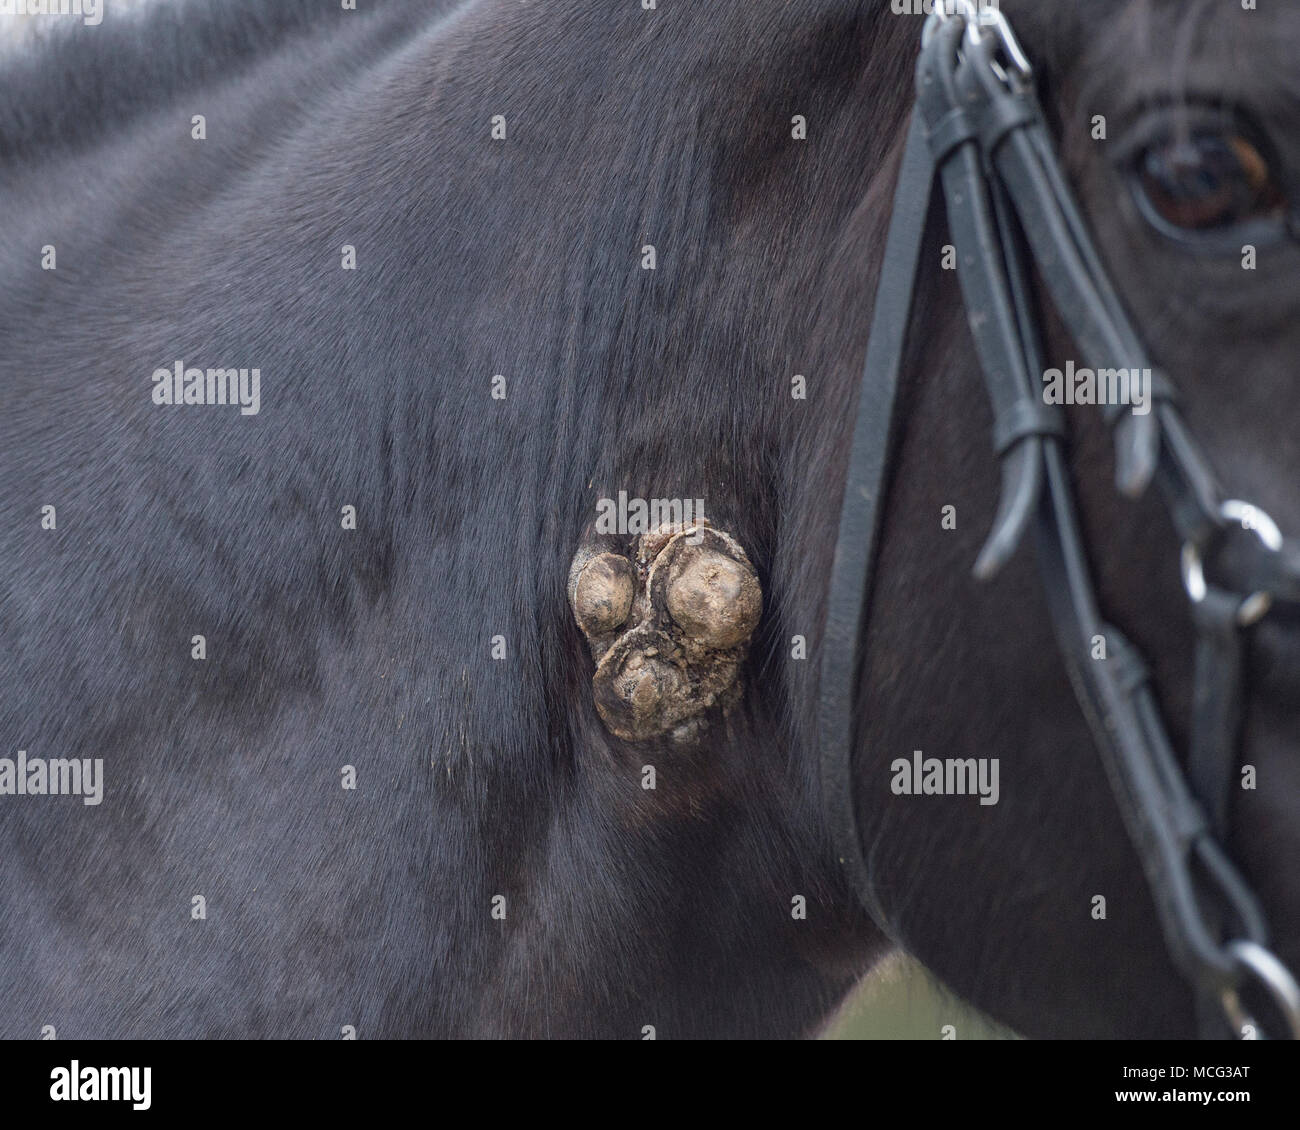 warts on a horse Stock Photo